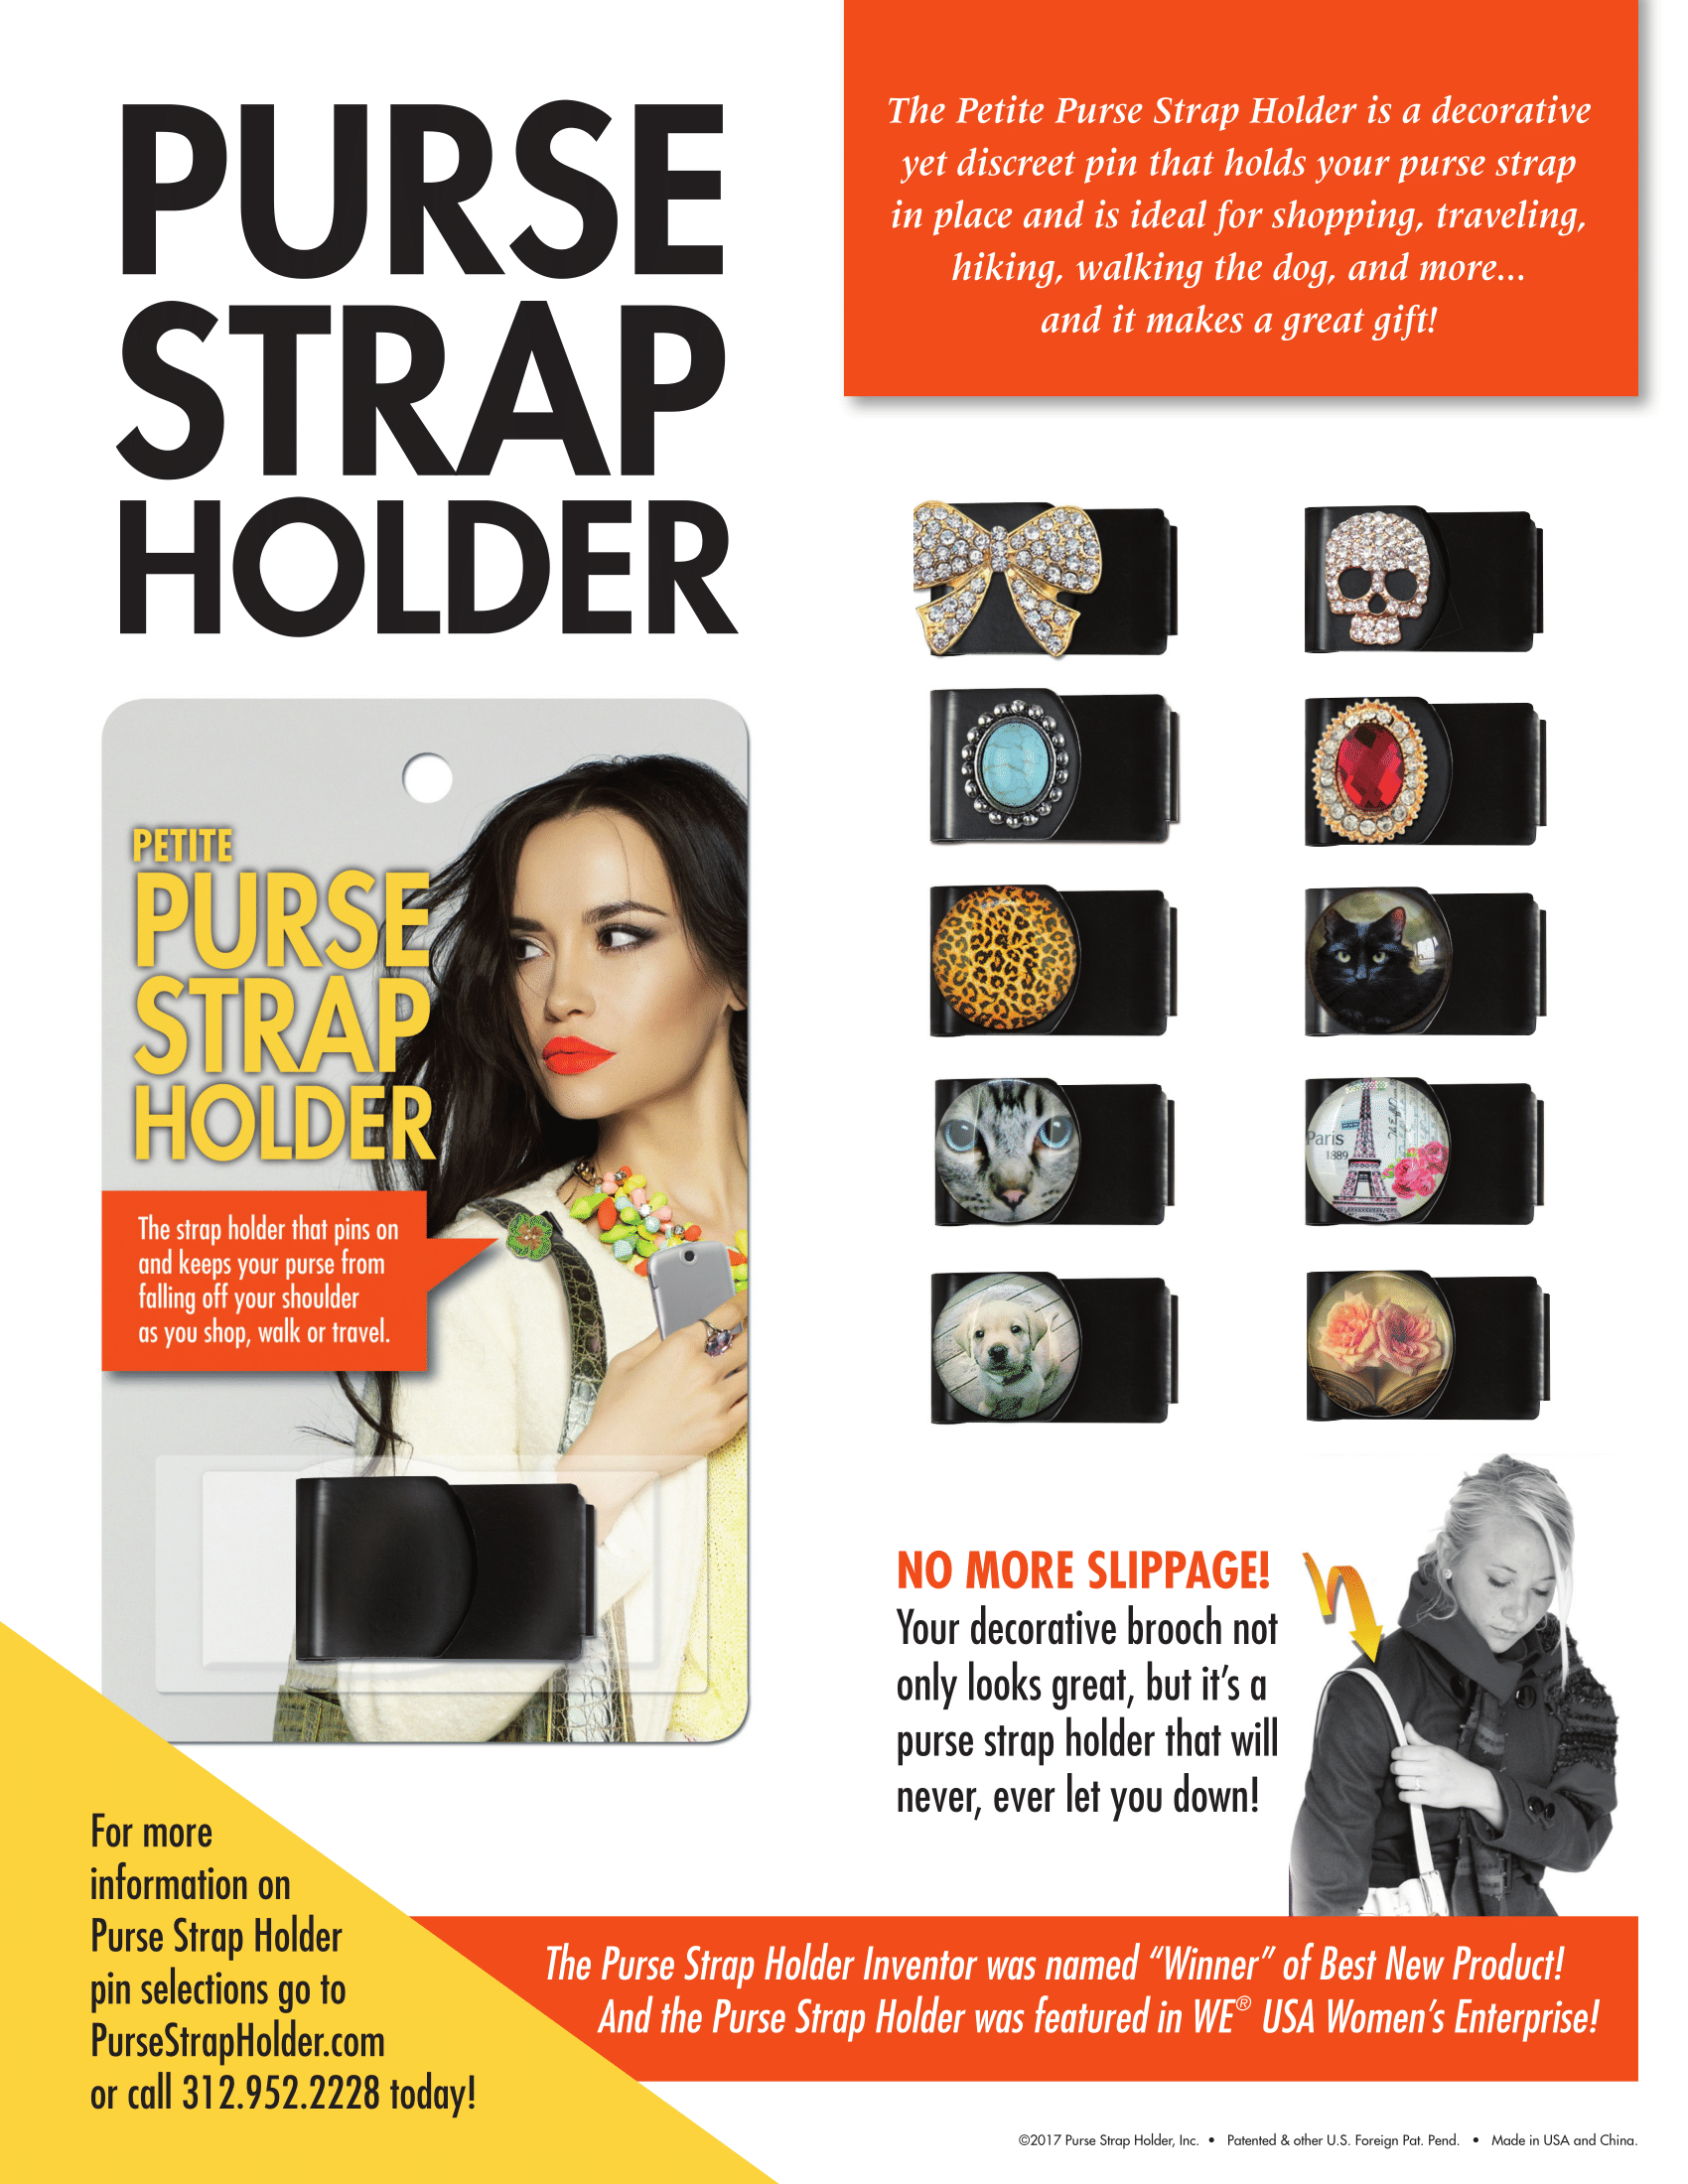 Purse Strap Holder to keep your purse straps securely in place